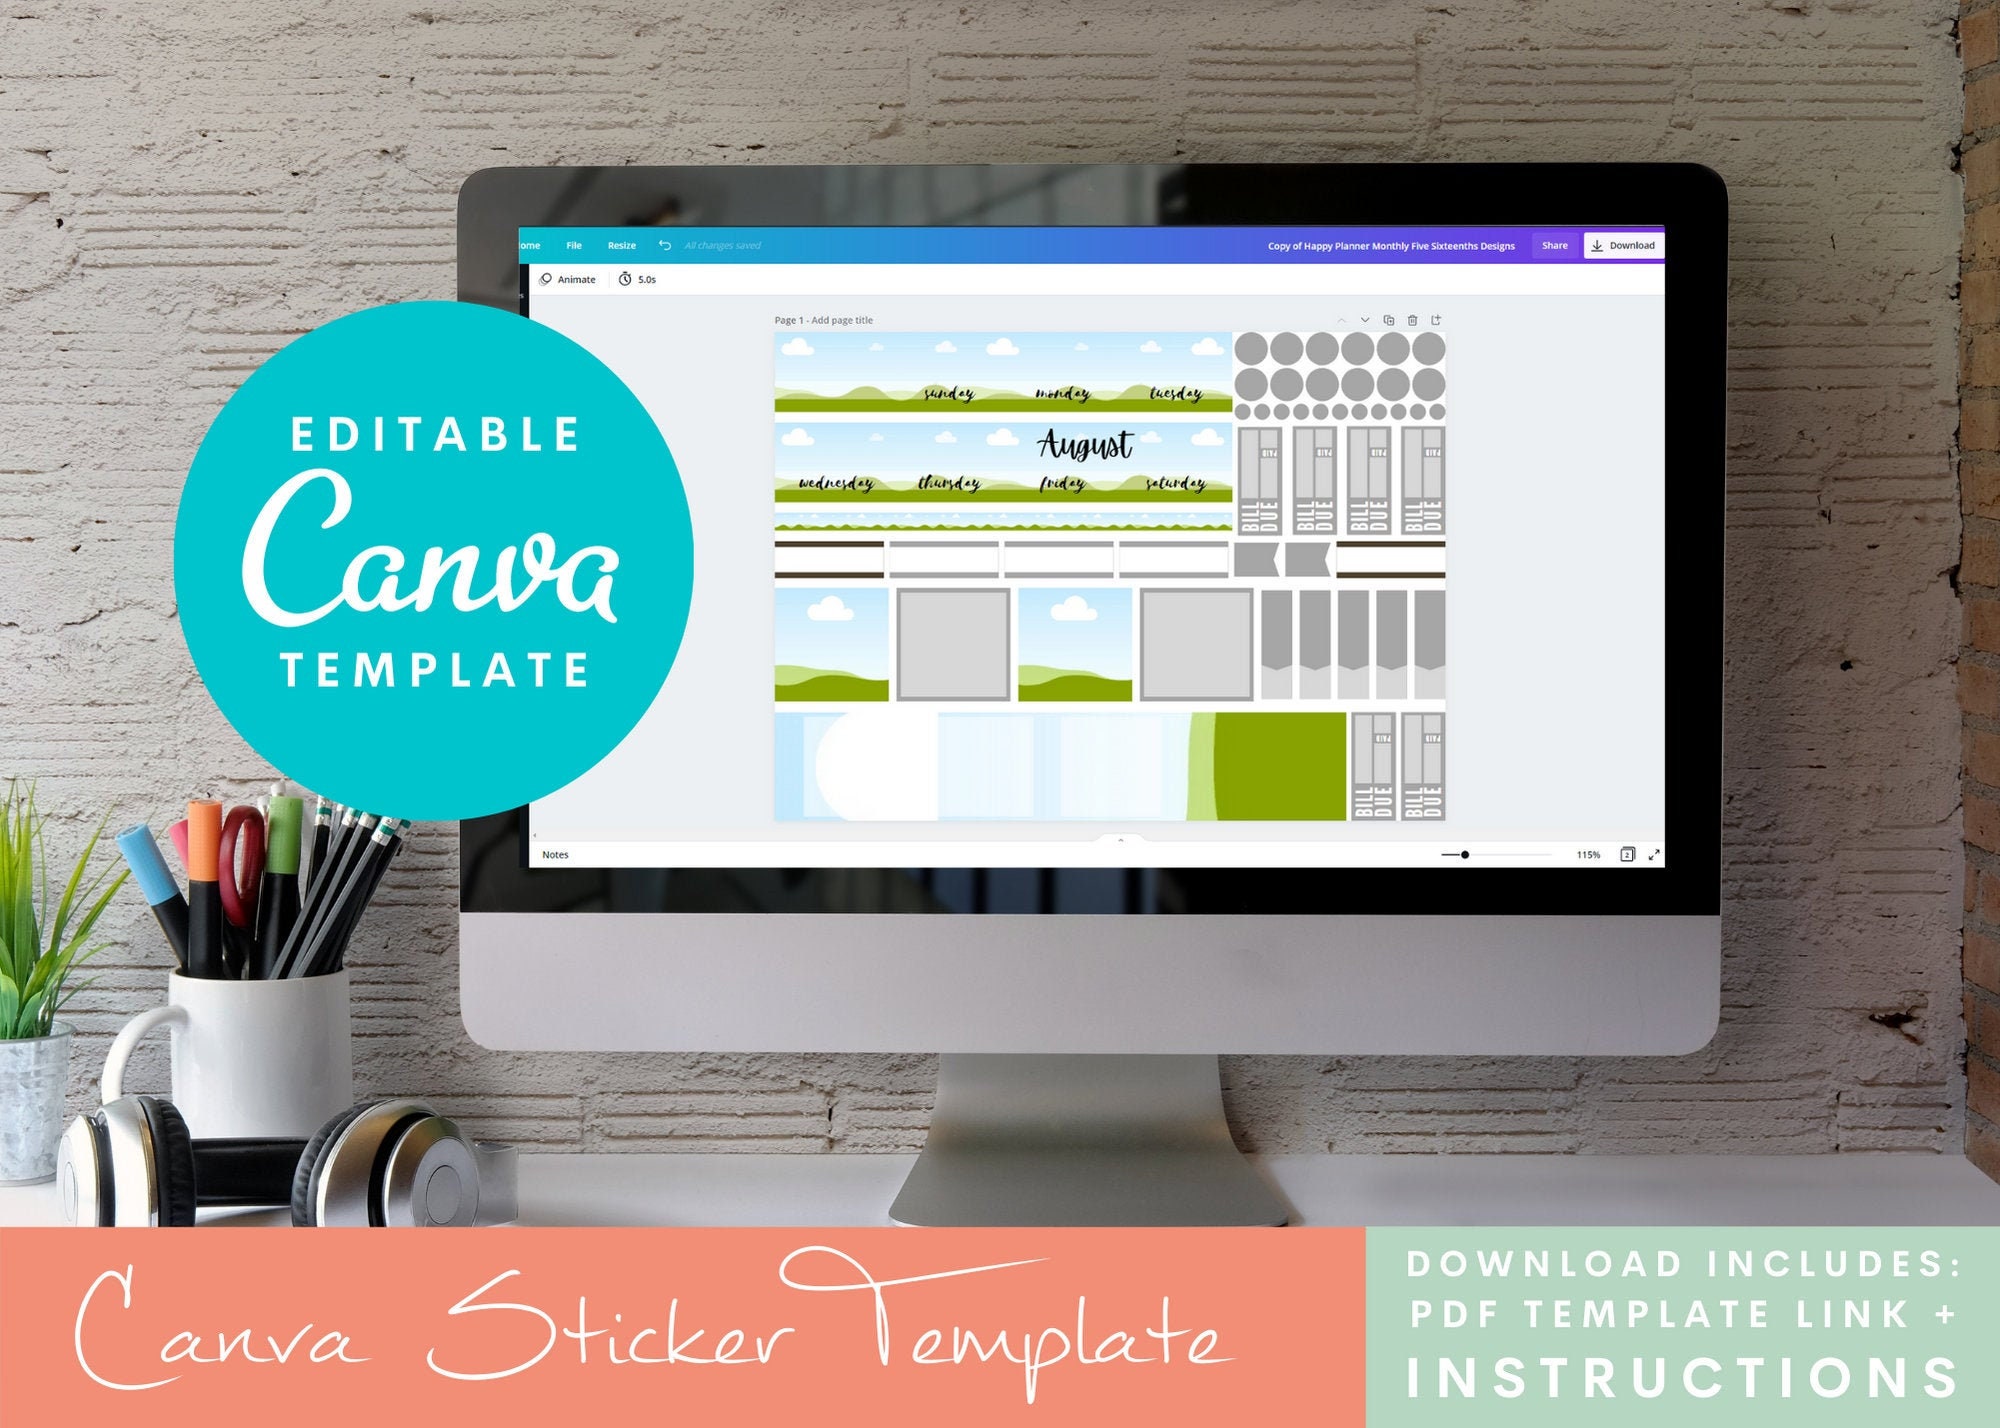 Stickers  Personalize & Order Prints from Canva